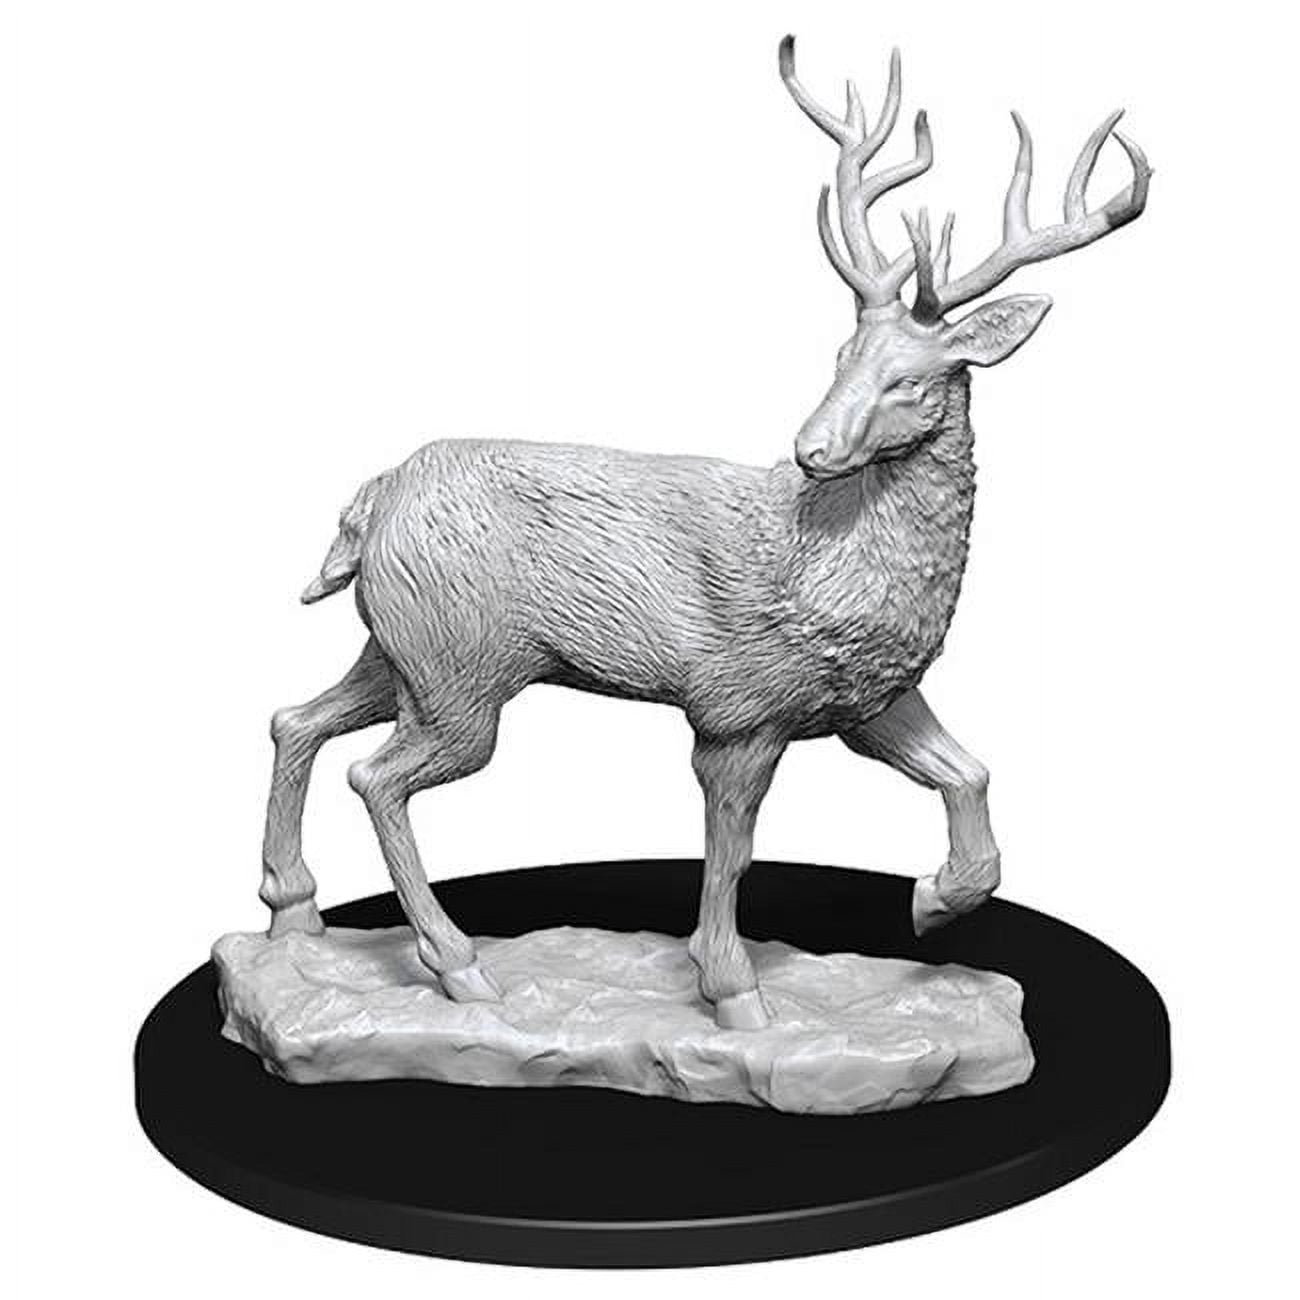 Wzk73550 Deep Cuts - Stag W7 - Figures